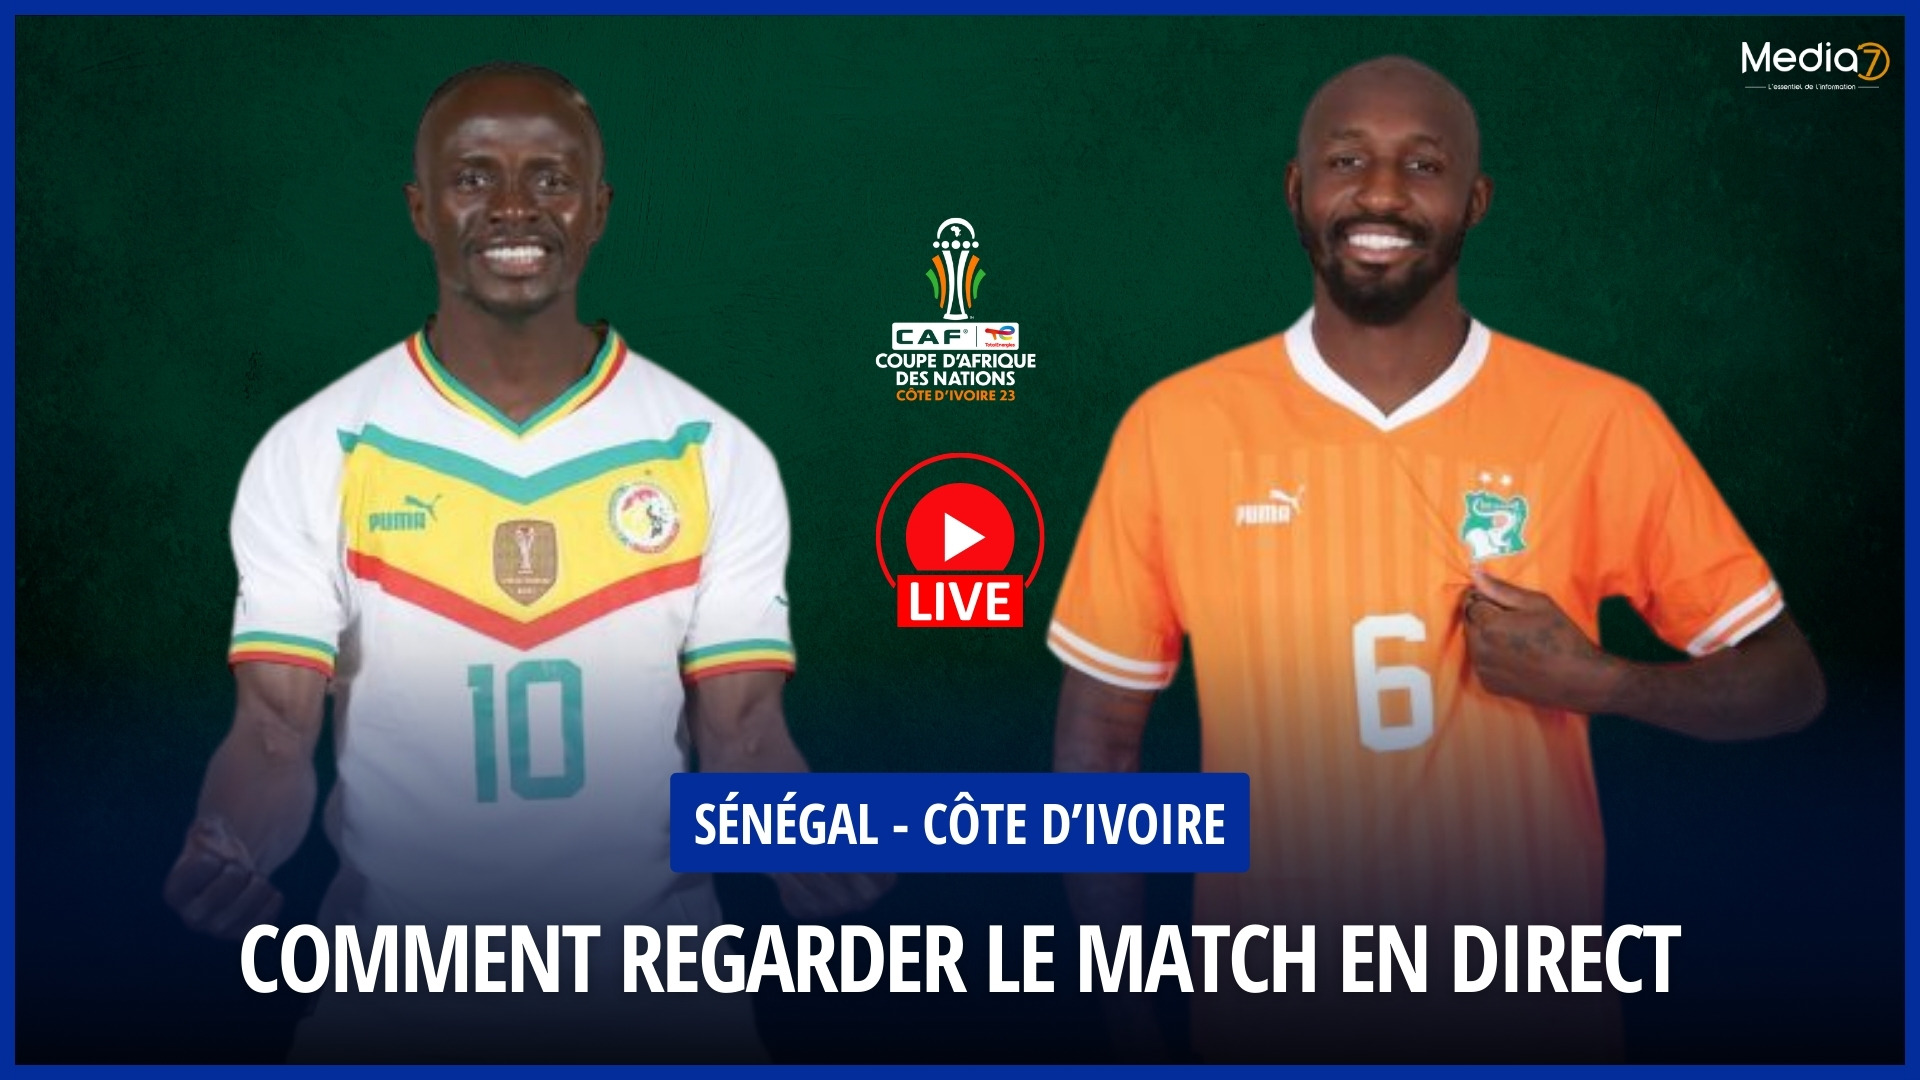 Watch Live: Senegal - Ivory Coast at CAN 2024 - Media7